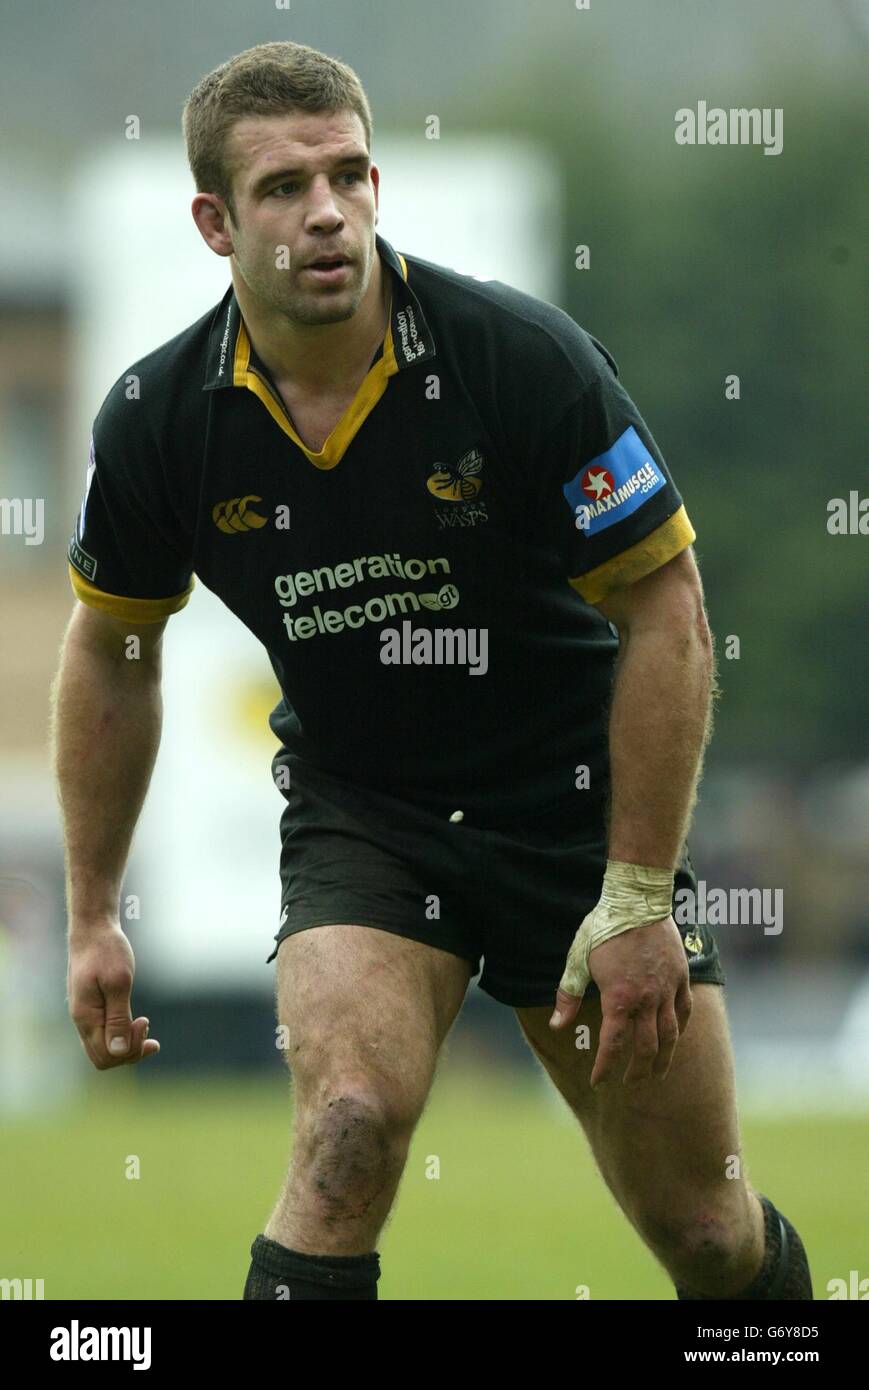 Joe Worsley 0f Wasps during the Heineken Cup Quarter Final at The Causeway, Wycombe. Stock Photo